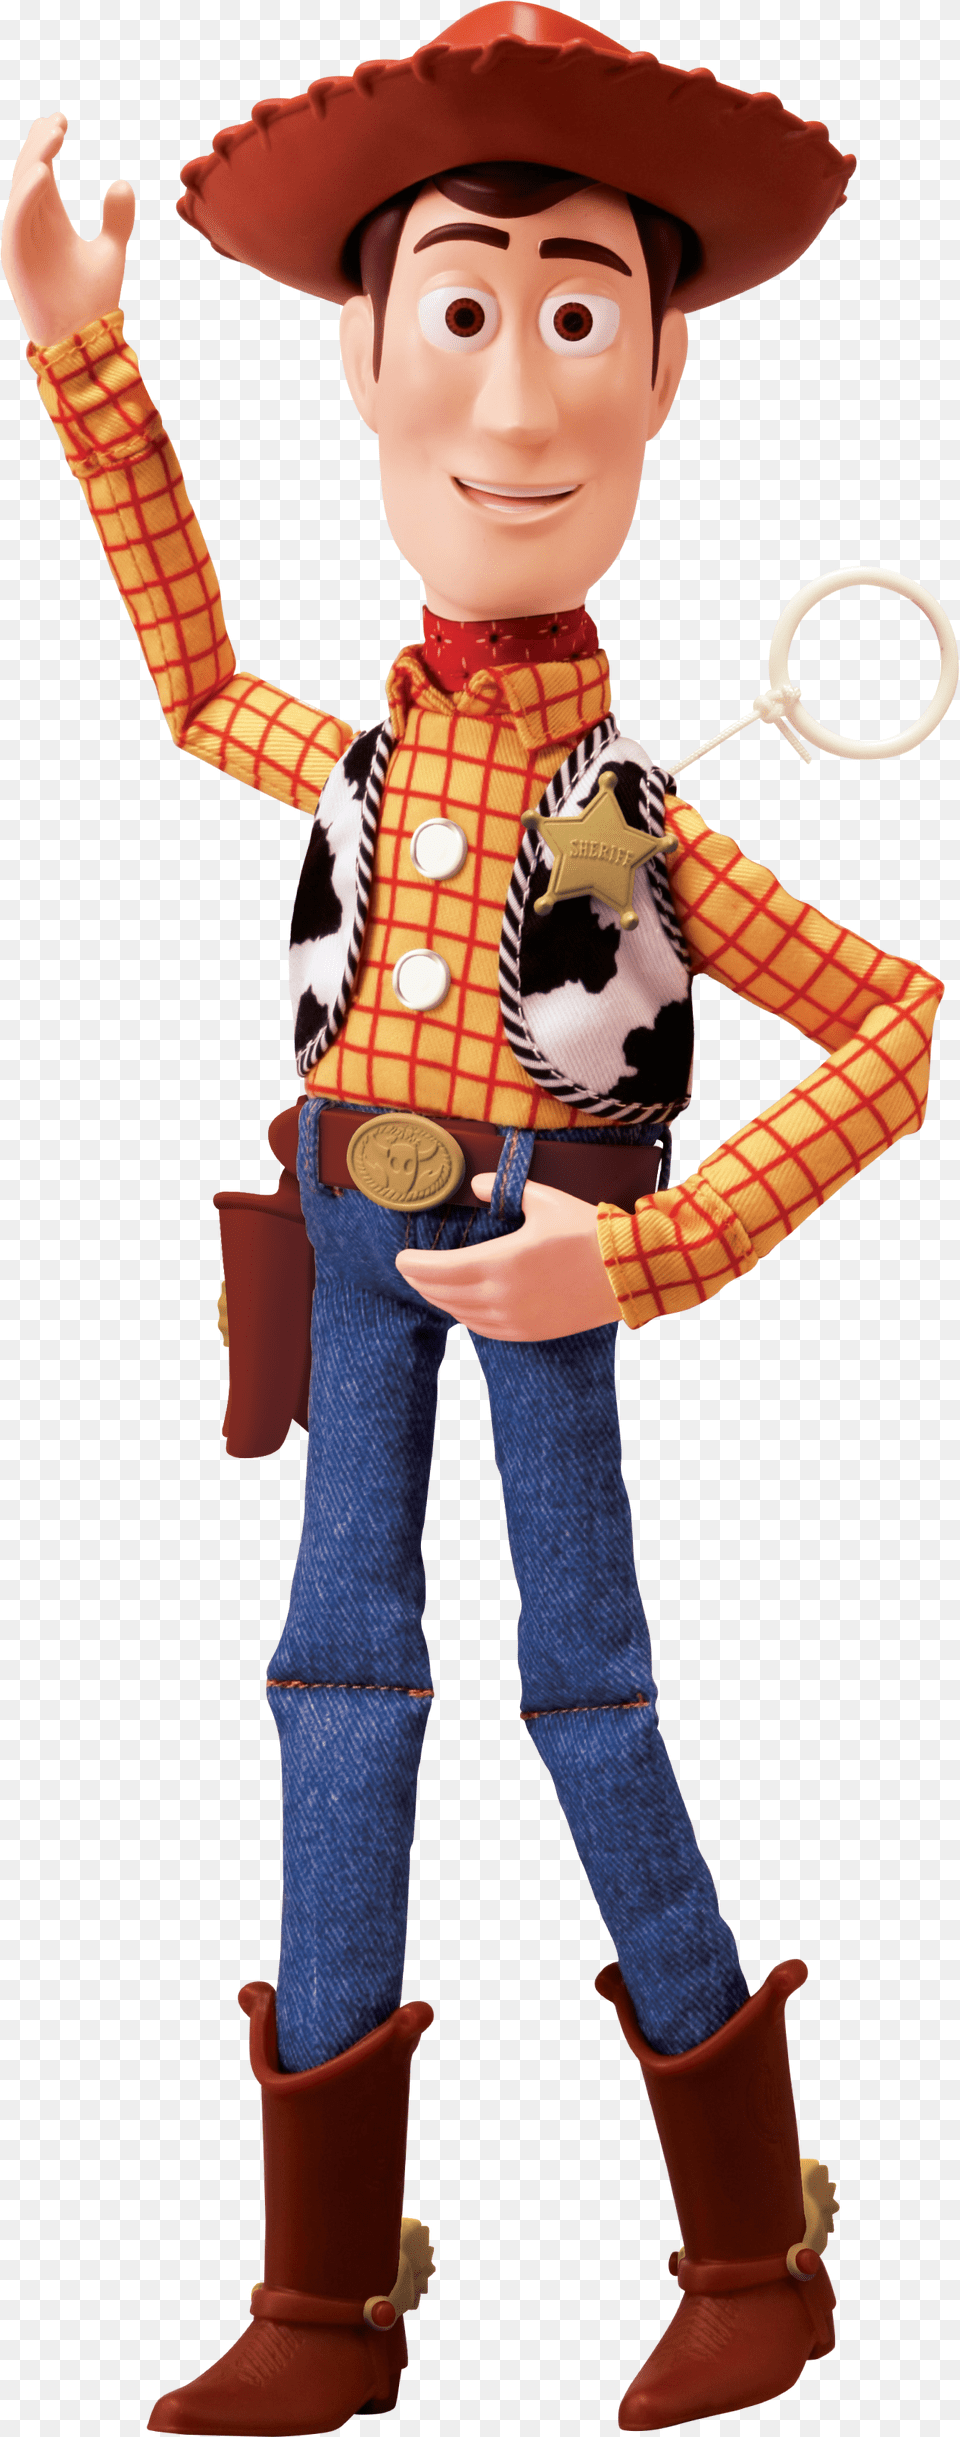 Toy Story 4 Life Size Talking Woody Action Figure Toy Story 4 Toys R Us, Boy, Child, Male, Person Png Image